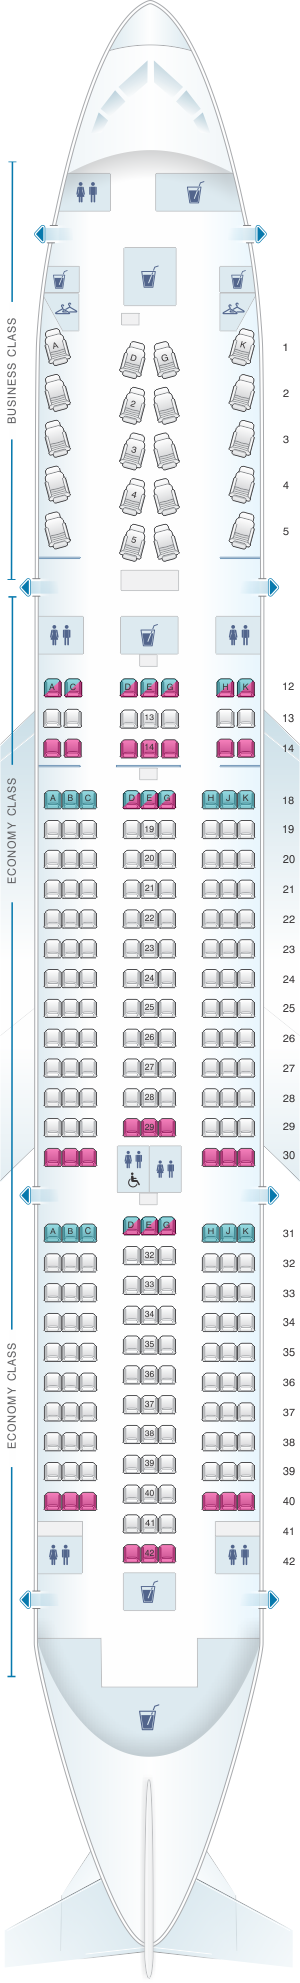 Seat map for Air Canada Boeing B787-8 (788) North America